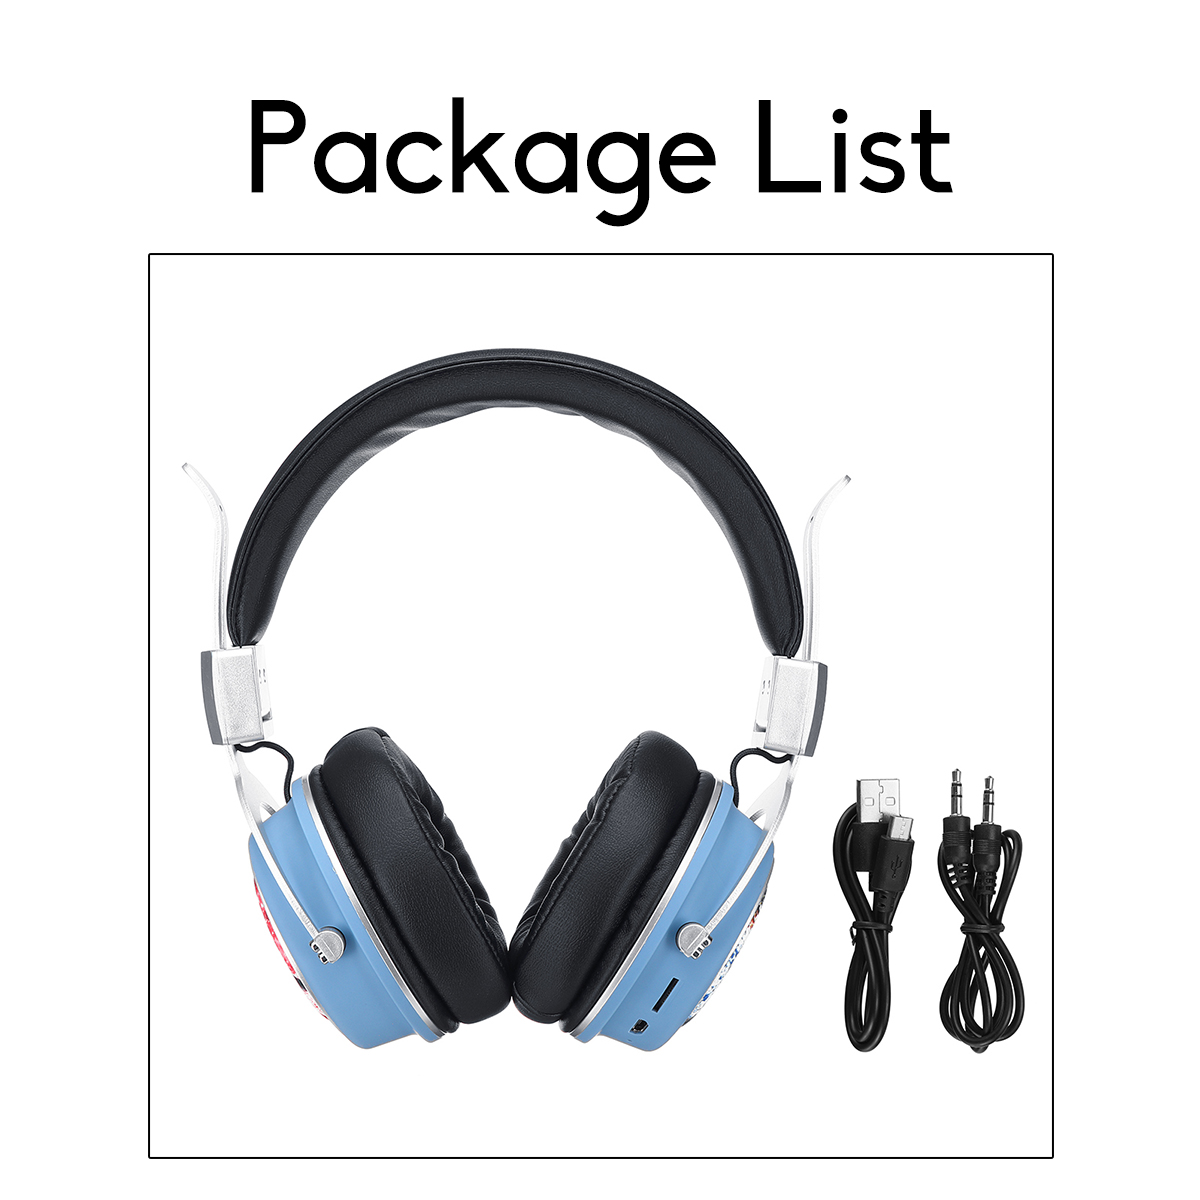 MH5-Wireless-bluetooth-50-Headphone-Foldable-Pattern-3D-Stereo-TF-Card-AUX-Headphone-with-Mic-1477112-12